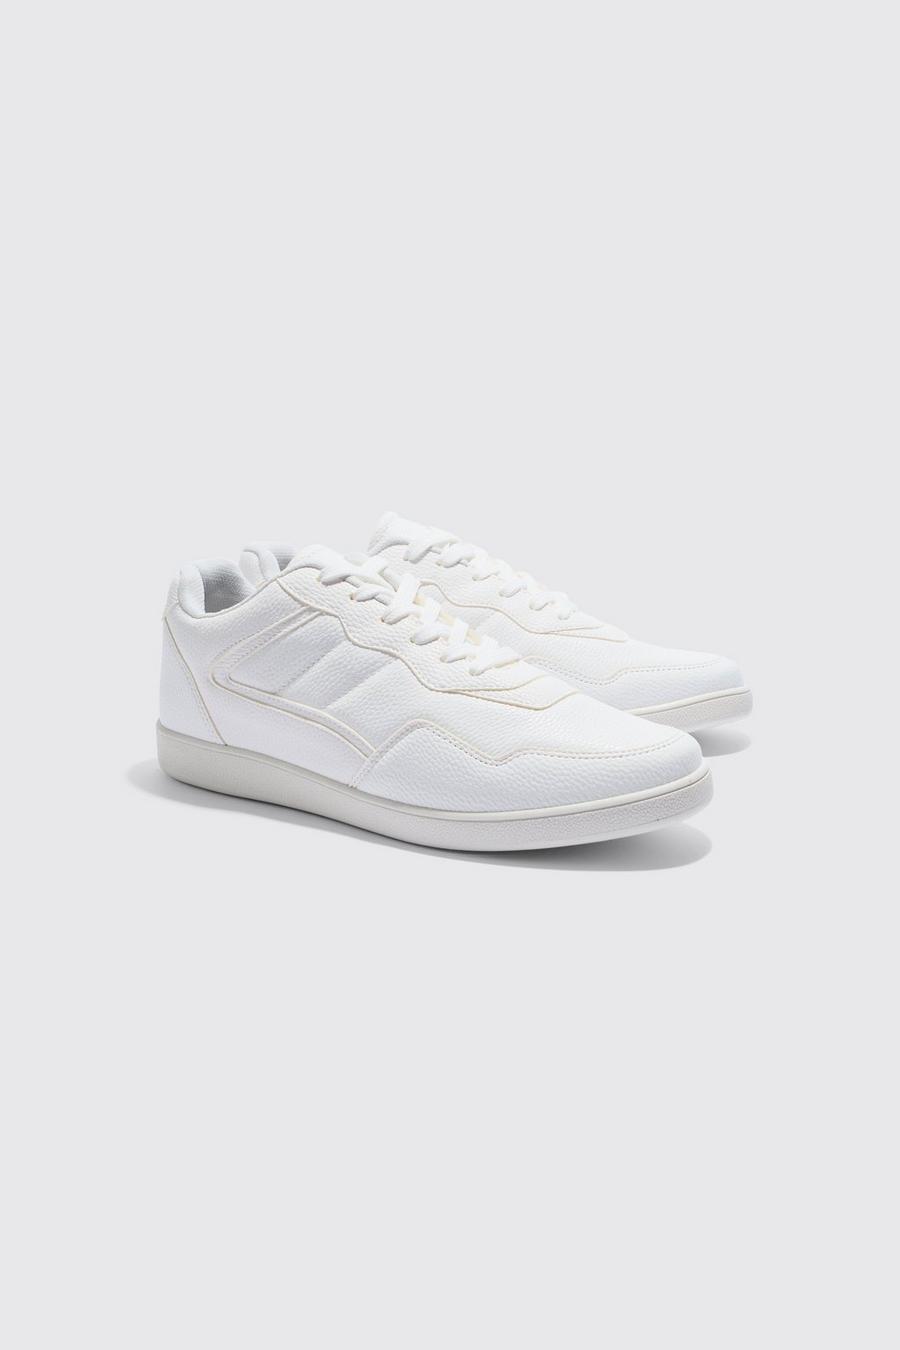 Multi Panel Chunky Sole classic In White